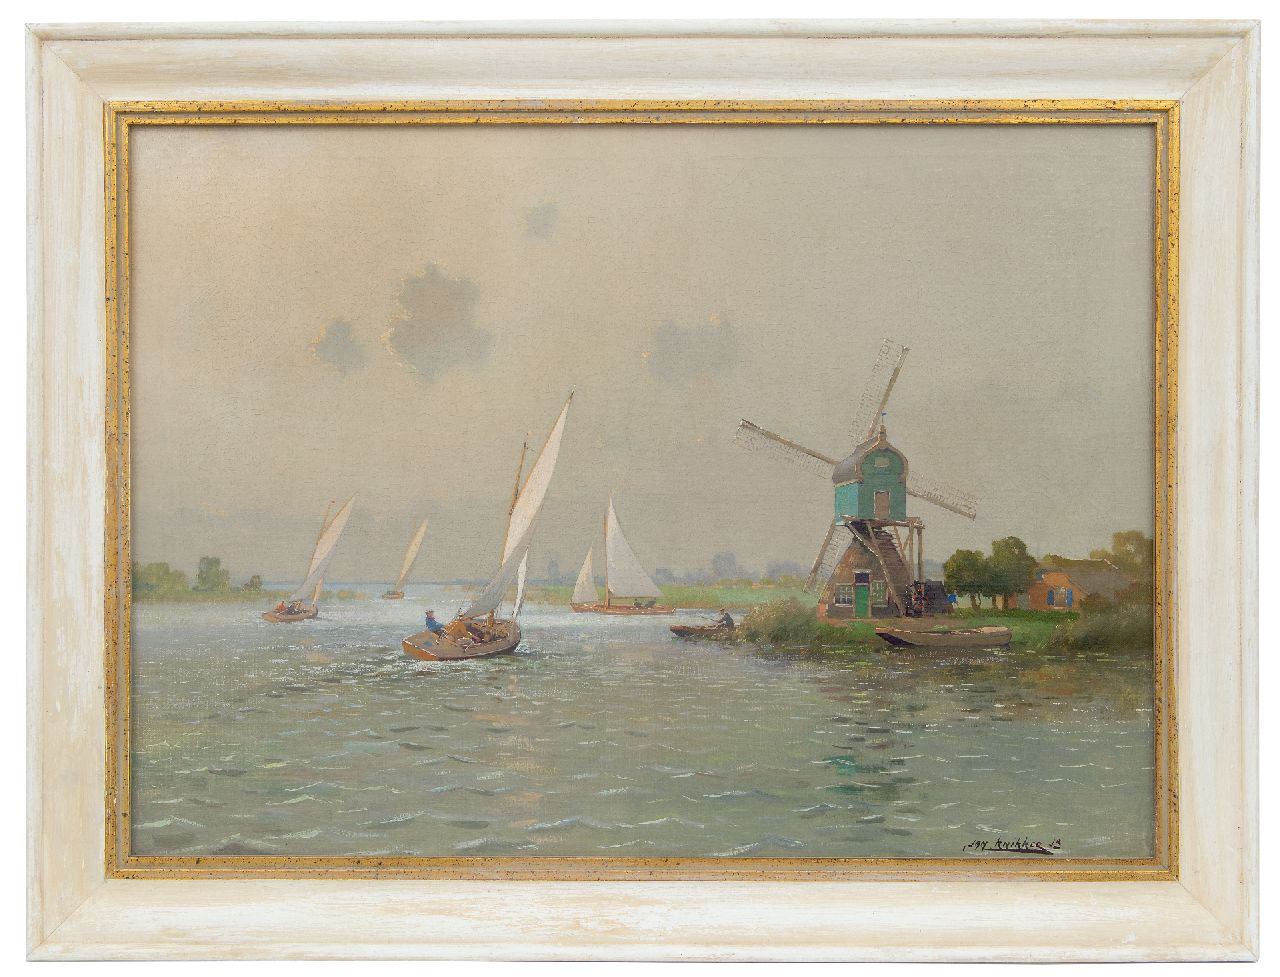 Knikker jr. J.S.  | 'Jan' Simon  Knikker jr. | Paintings offered for sale | Sailing competition on a lake in South-Holland, oil on canvas 50.4 x 70.1 cm, signed l.r.